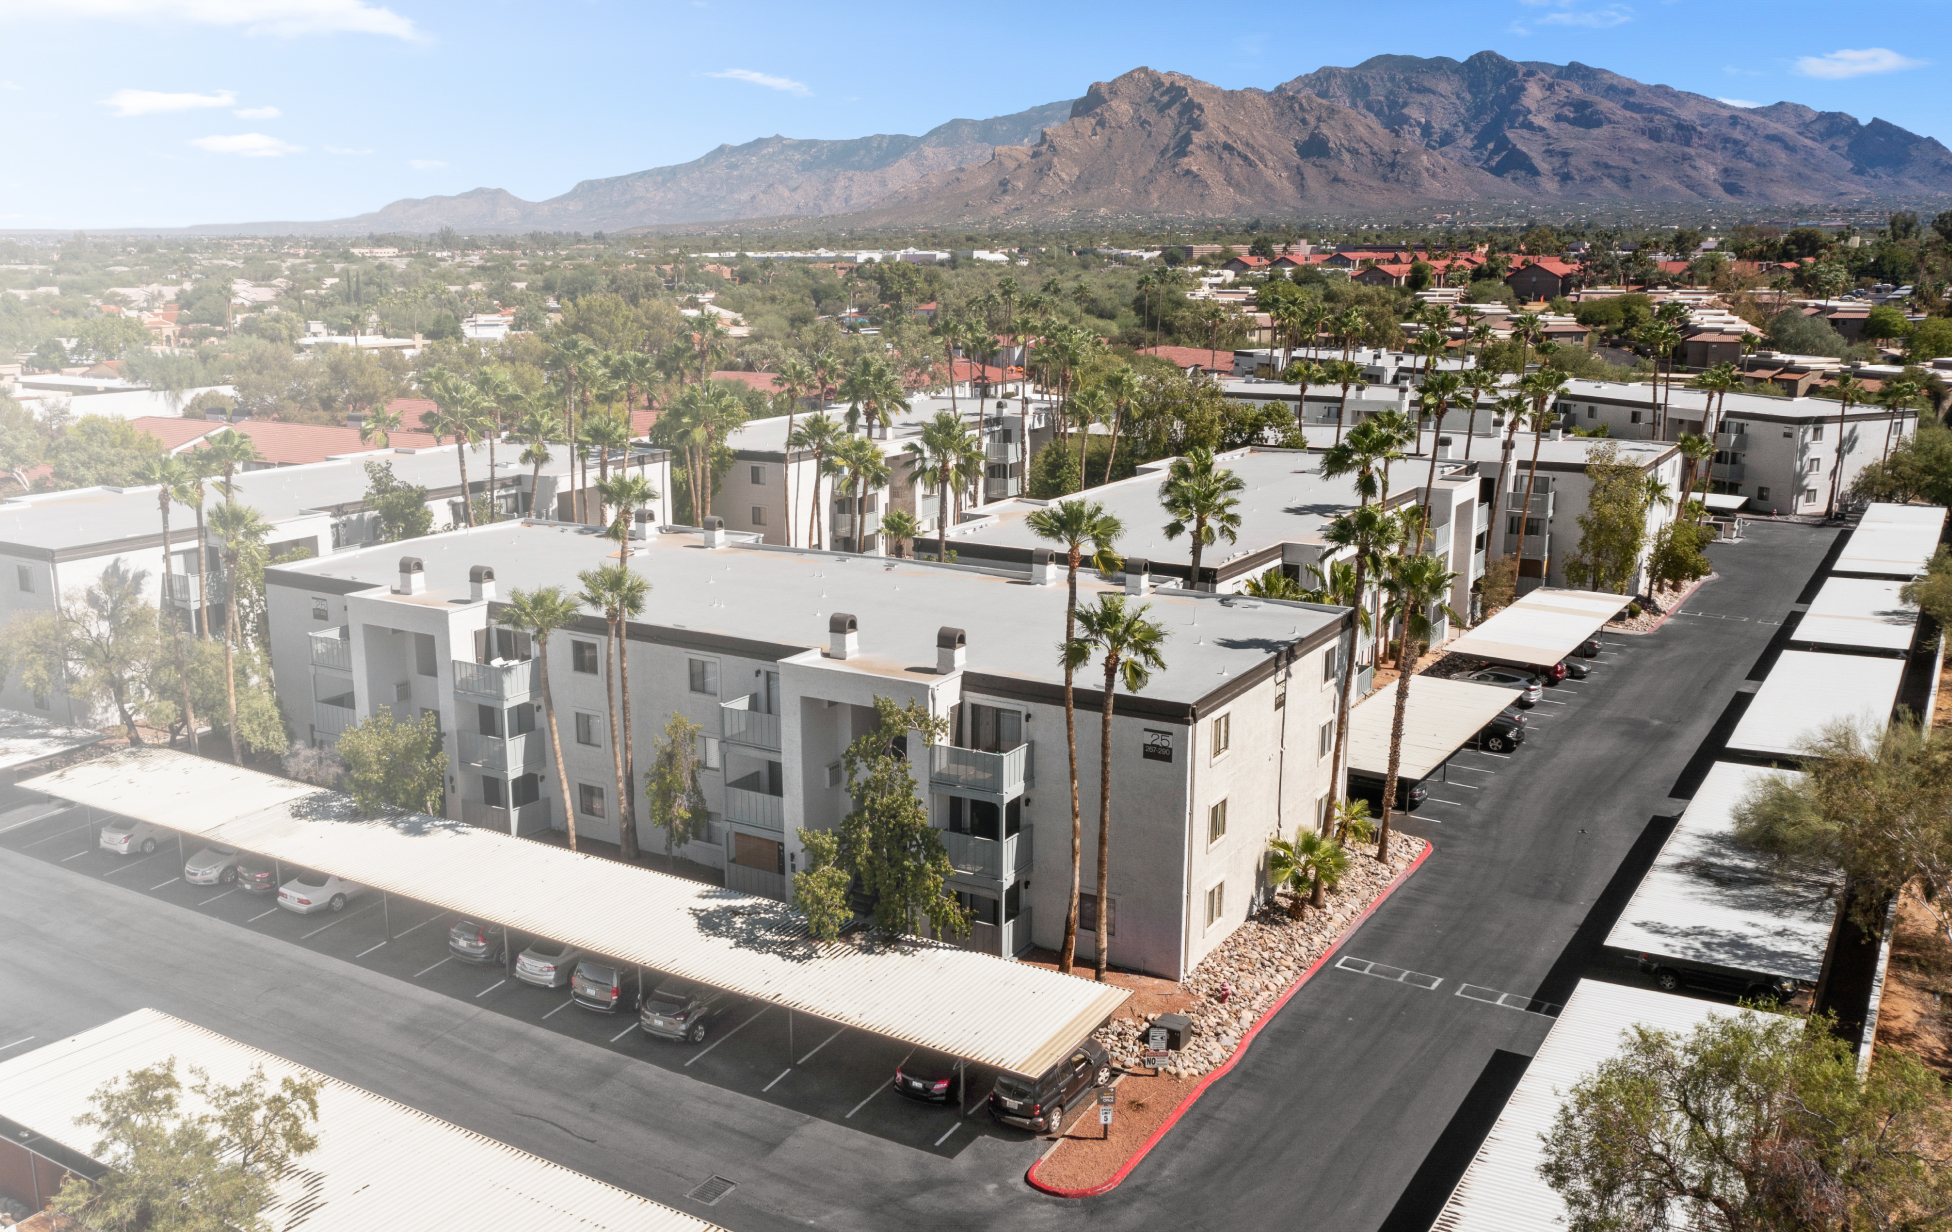 Photo of the exterior of an apartment complex in the southwest, with palm trees and a mountain in the background.